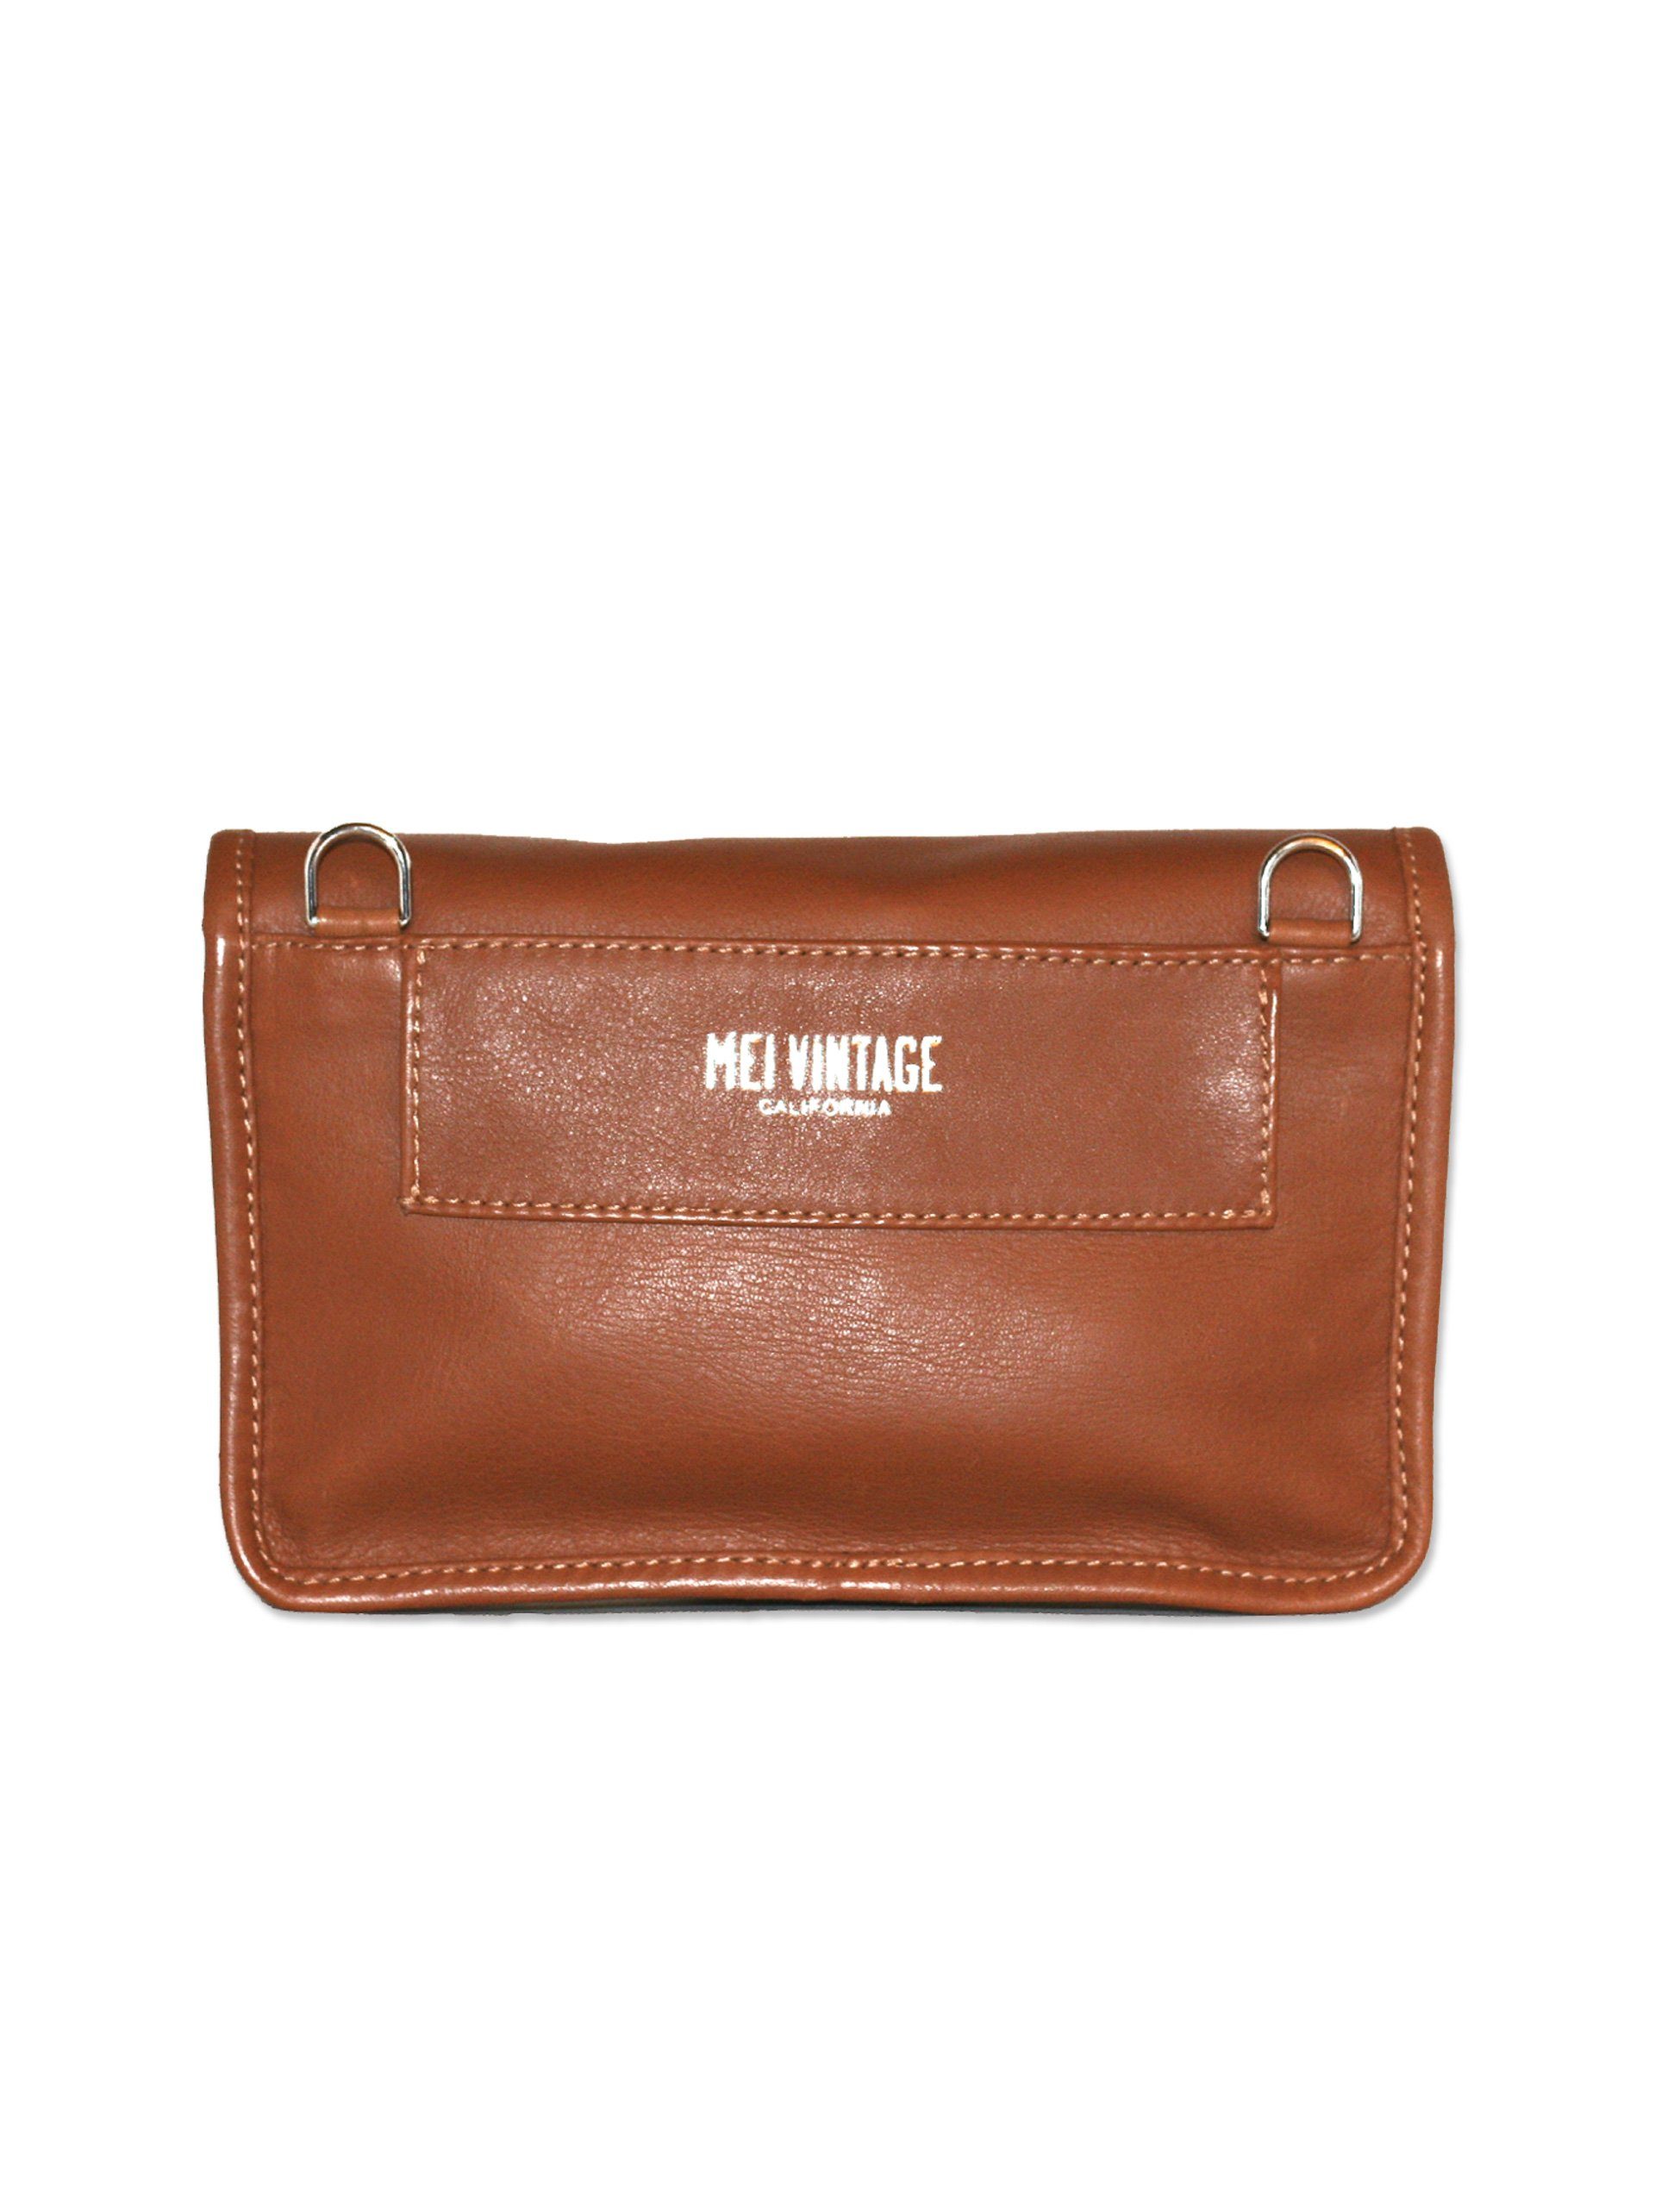 convertible fanny pack in cognac leather. Comes with detachable leather belt strap